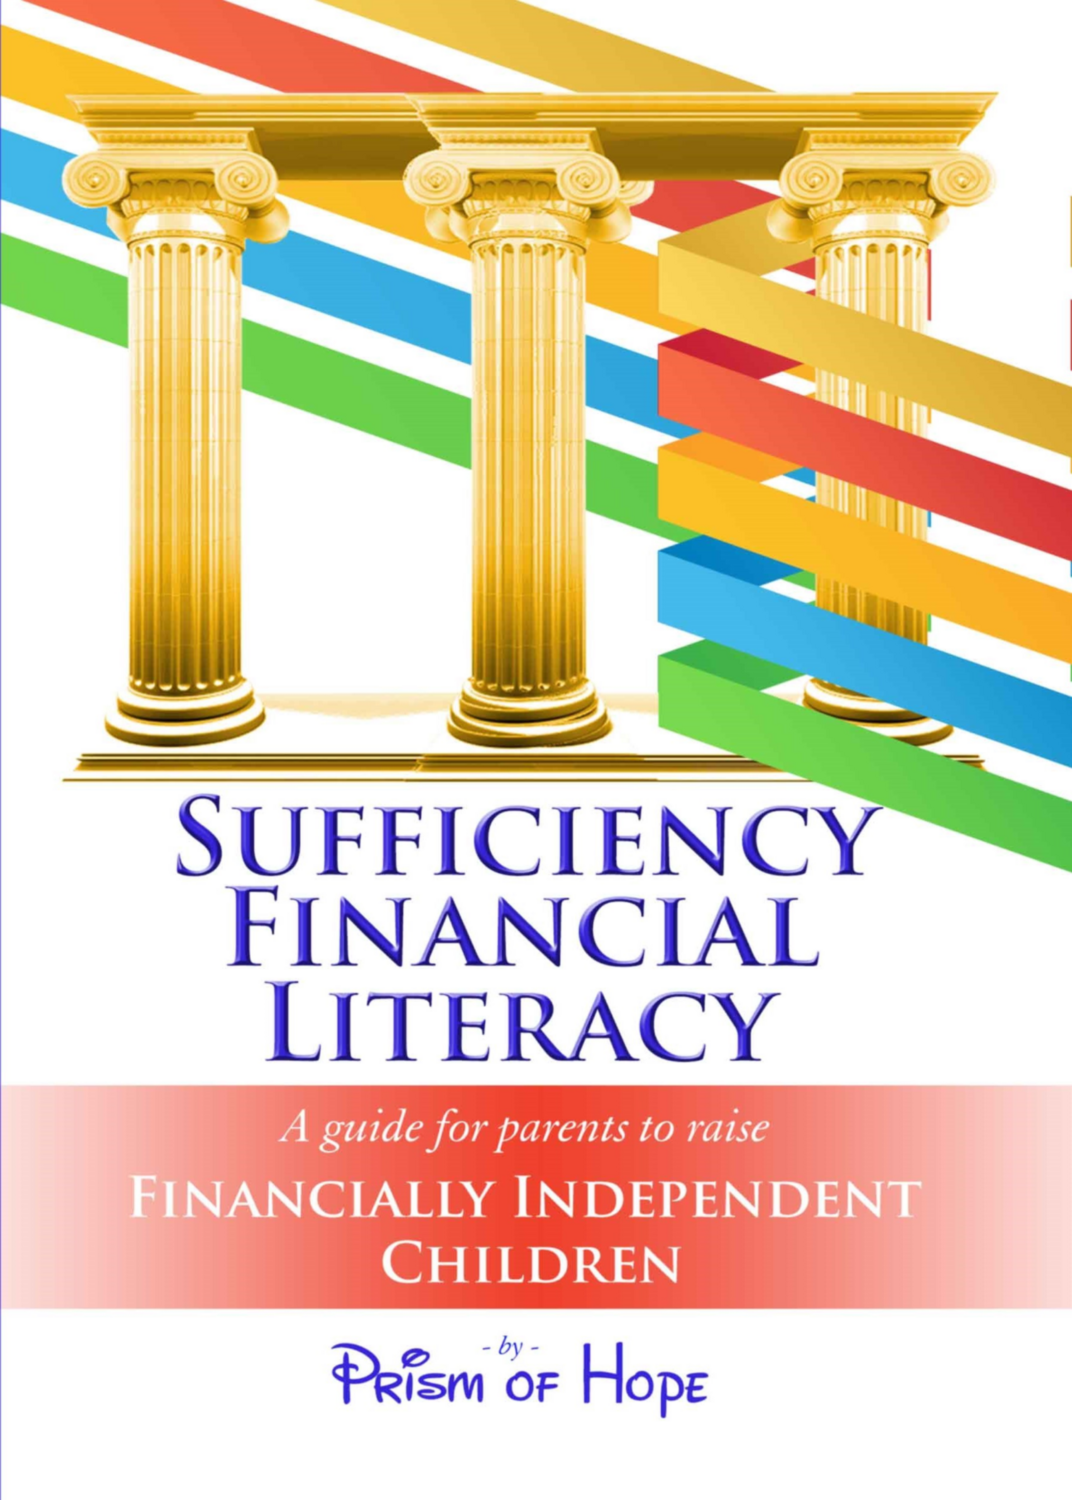 Sufficiency Financial Literacy